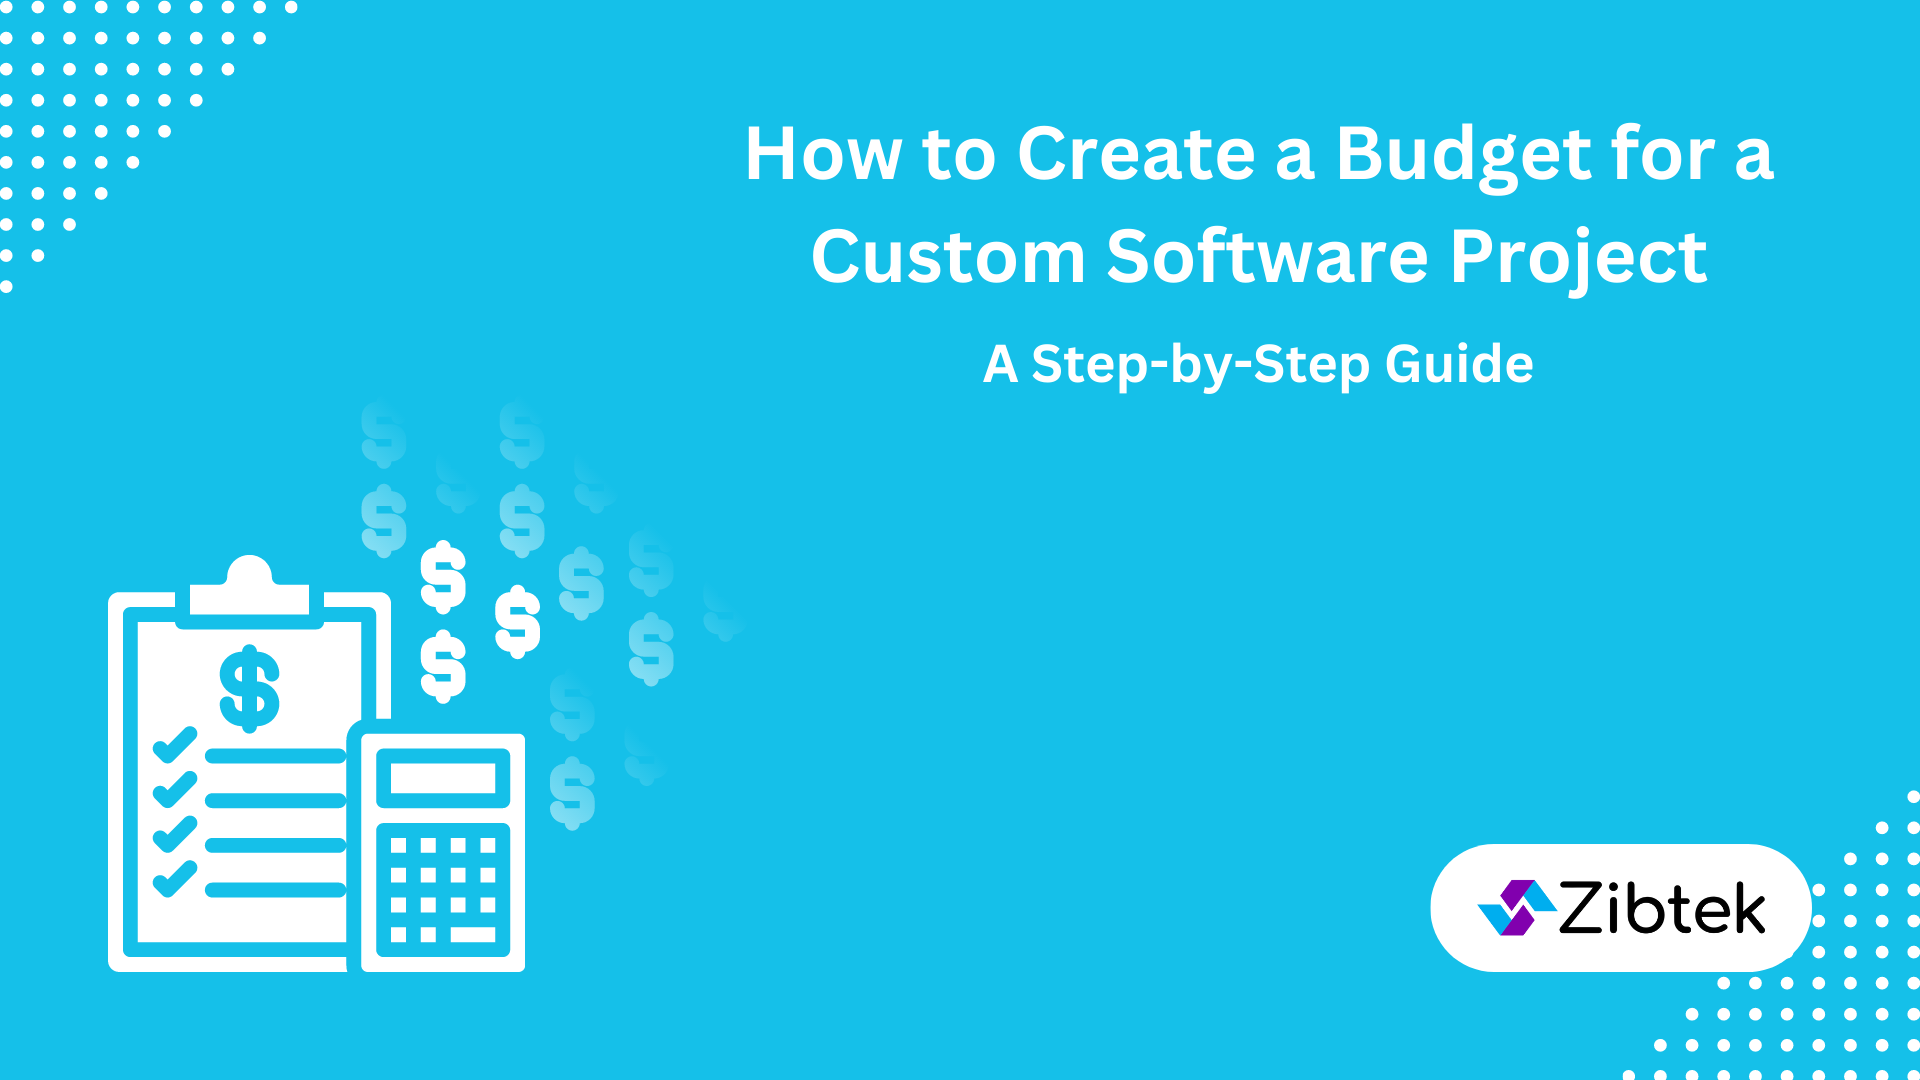 How to Create a Budget for a Custom Software Project: A Step-by-Step Guide